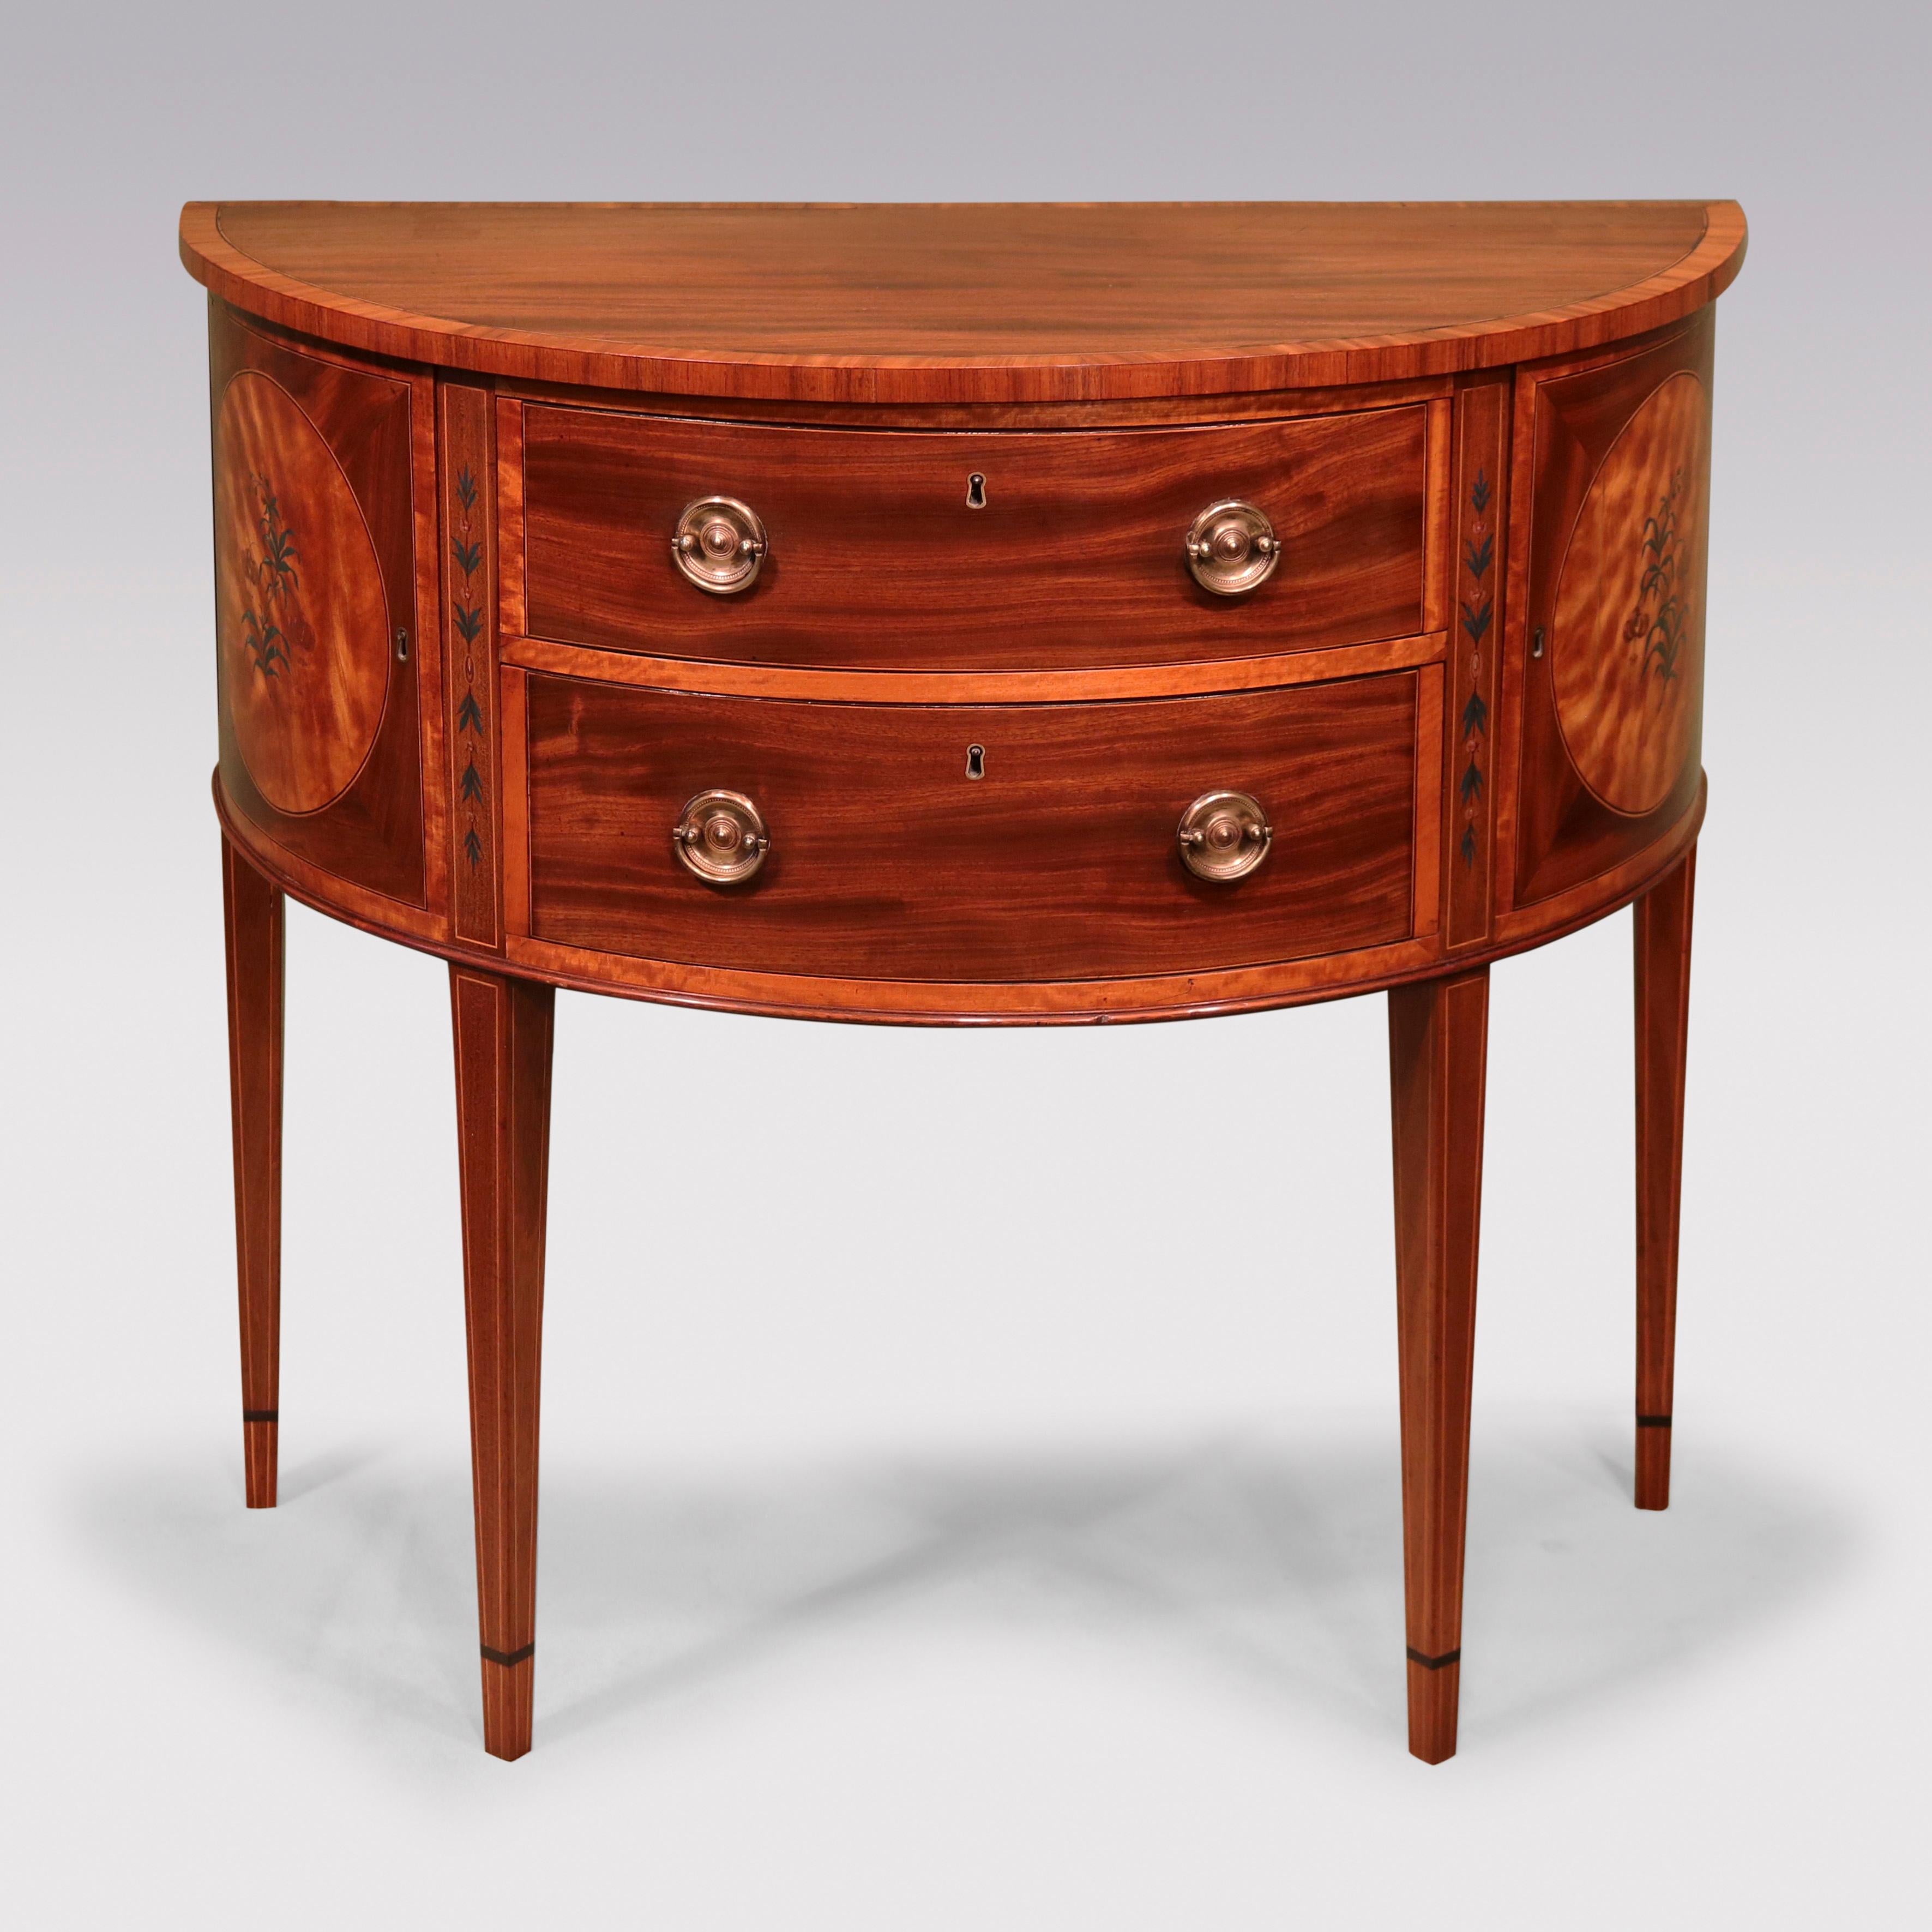 An unusual Sheraton half-round “Commode” bearing label: A & M Coleridge Collection, having satinwood crossbanded half-round top above 2 central drawers retaining original handles, flanked by satinwood & floral painted panelled doors supported on